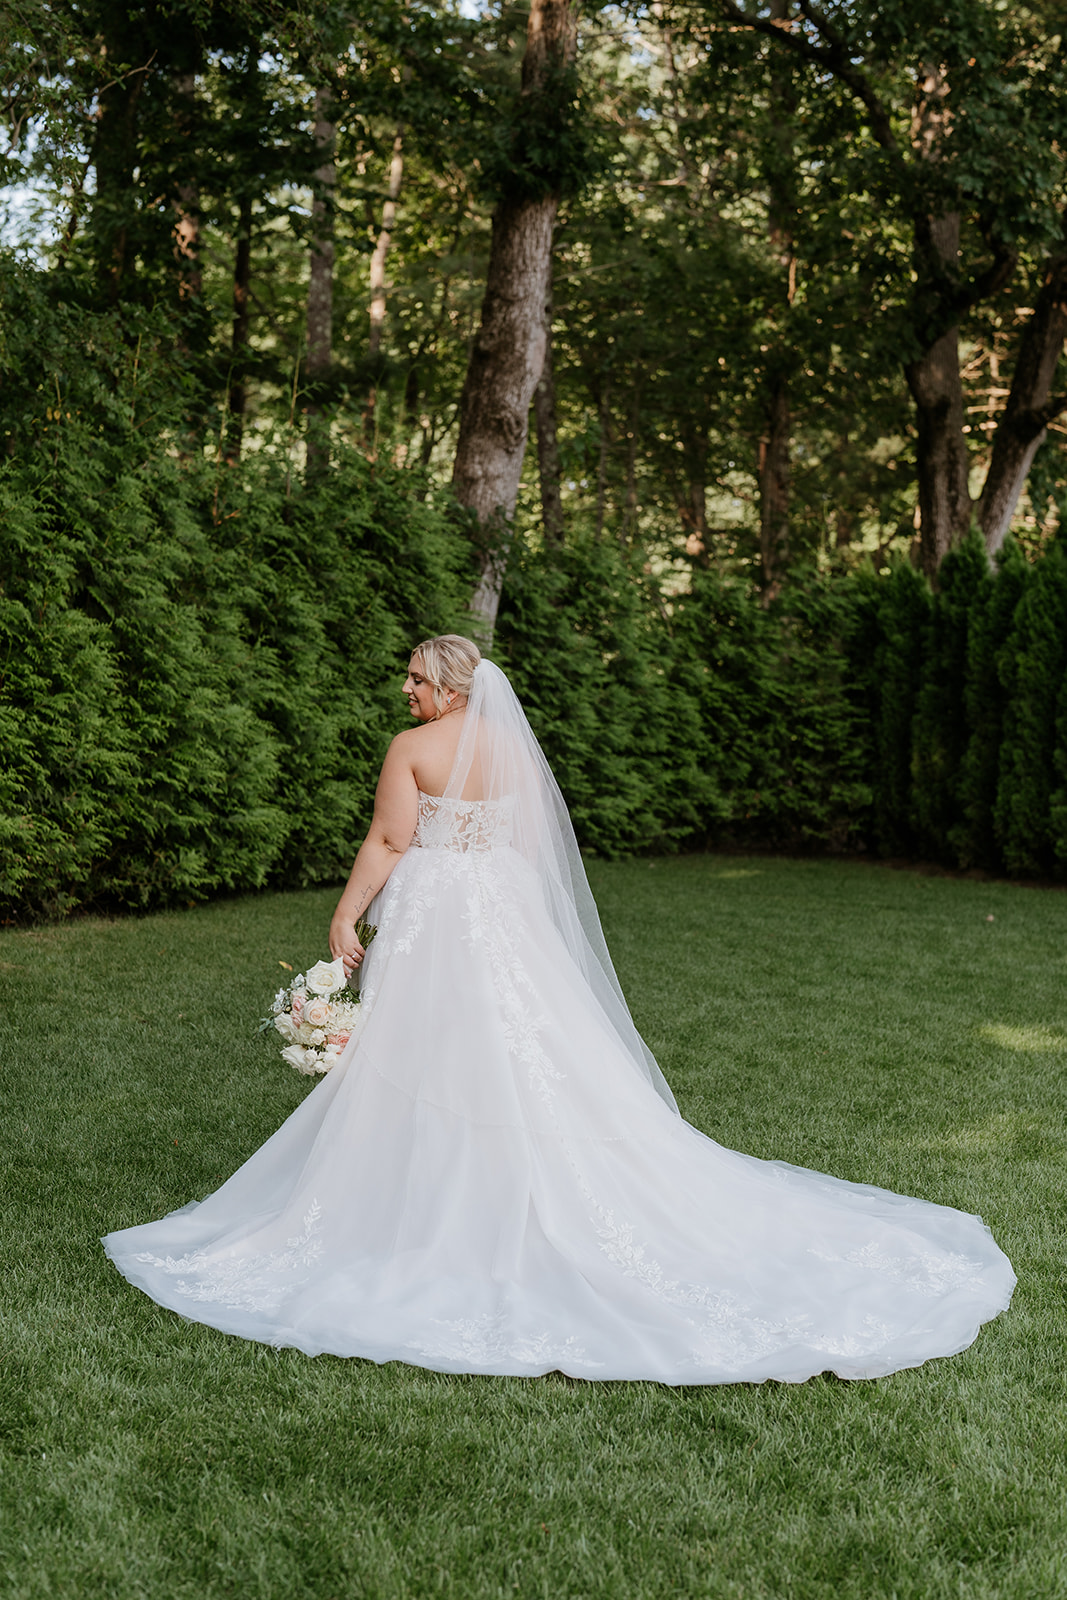 A bride in a white wedding dress with a lace bodice and a full skirt is standing on a grassy lawn with a bouquet in her hands, smiling off to the side. the photograph is in.